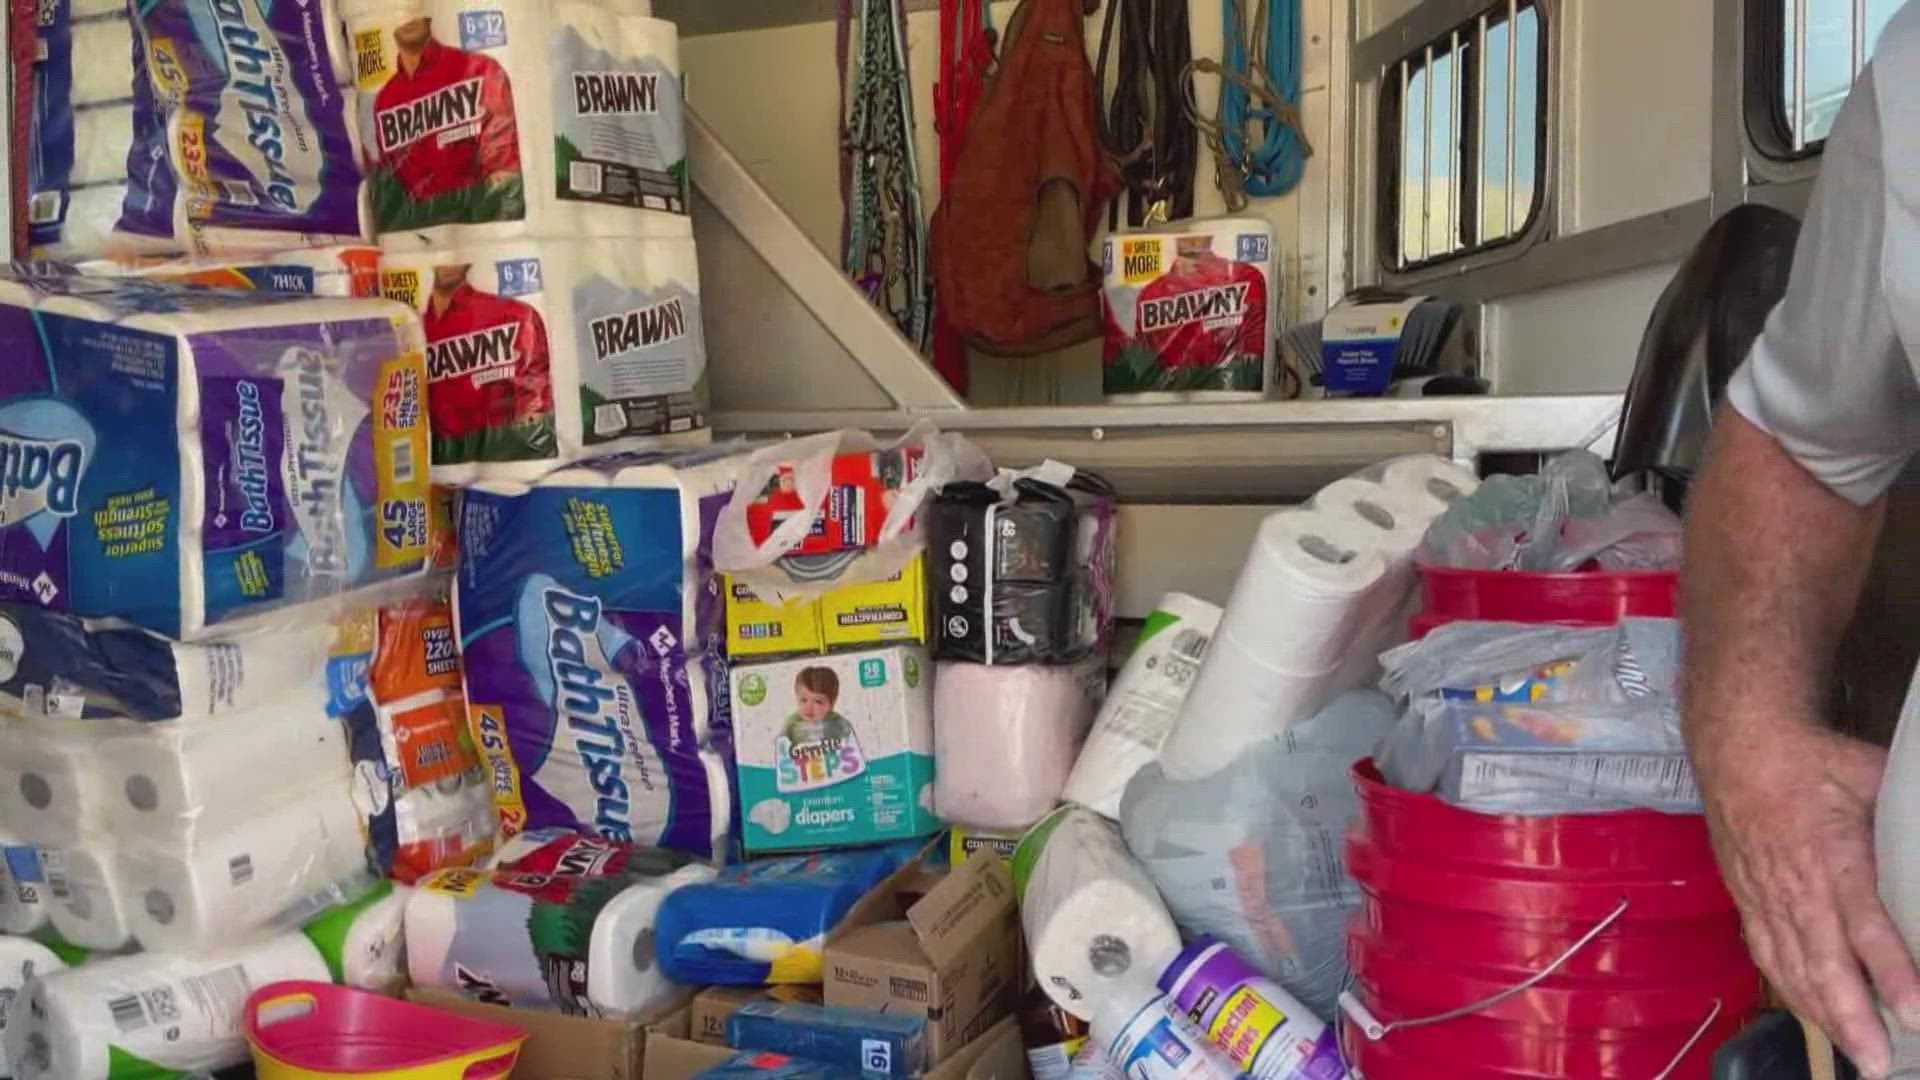 Donation drives are trying to collect as many items as they can to help people affected by devastating floods in Kentucky.